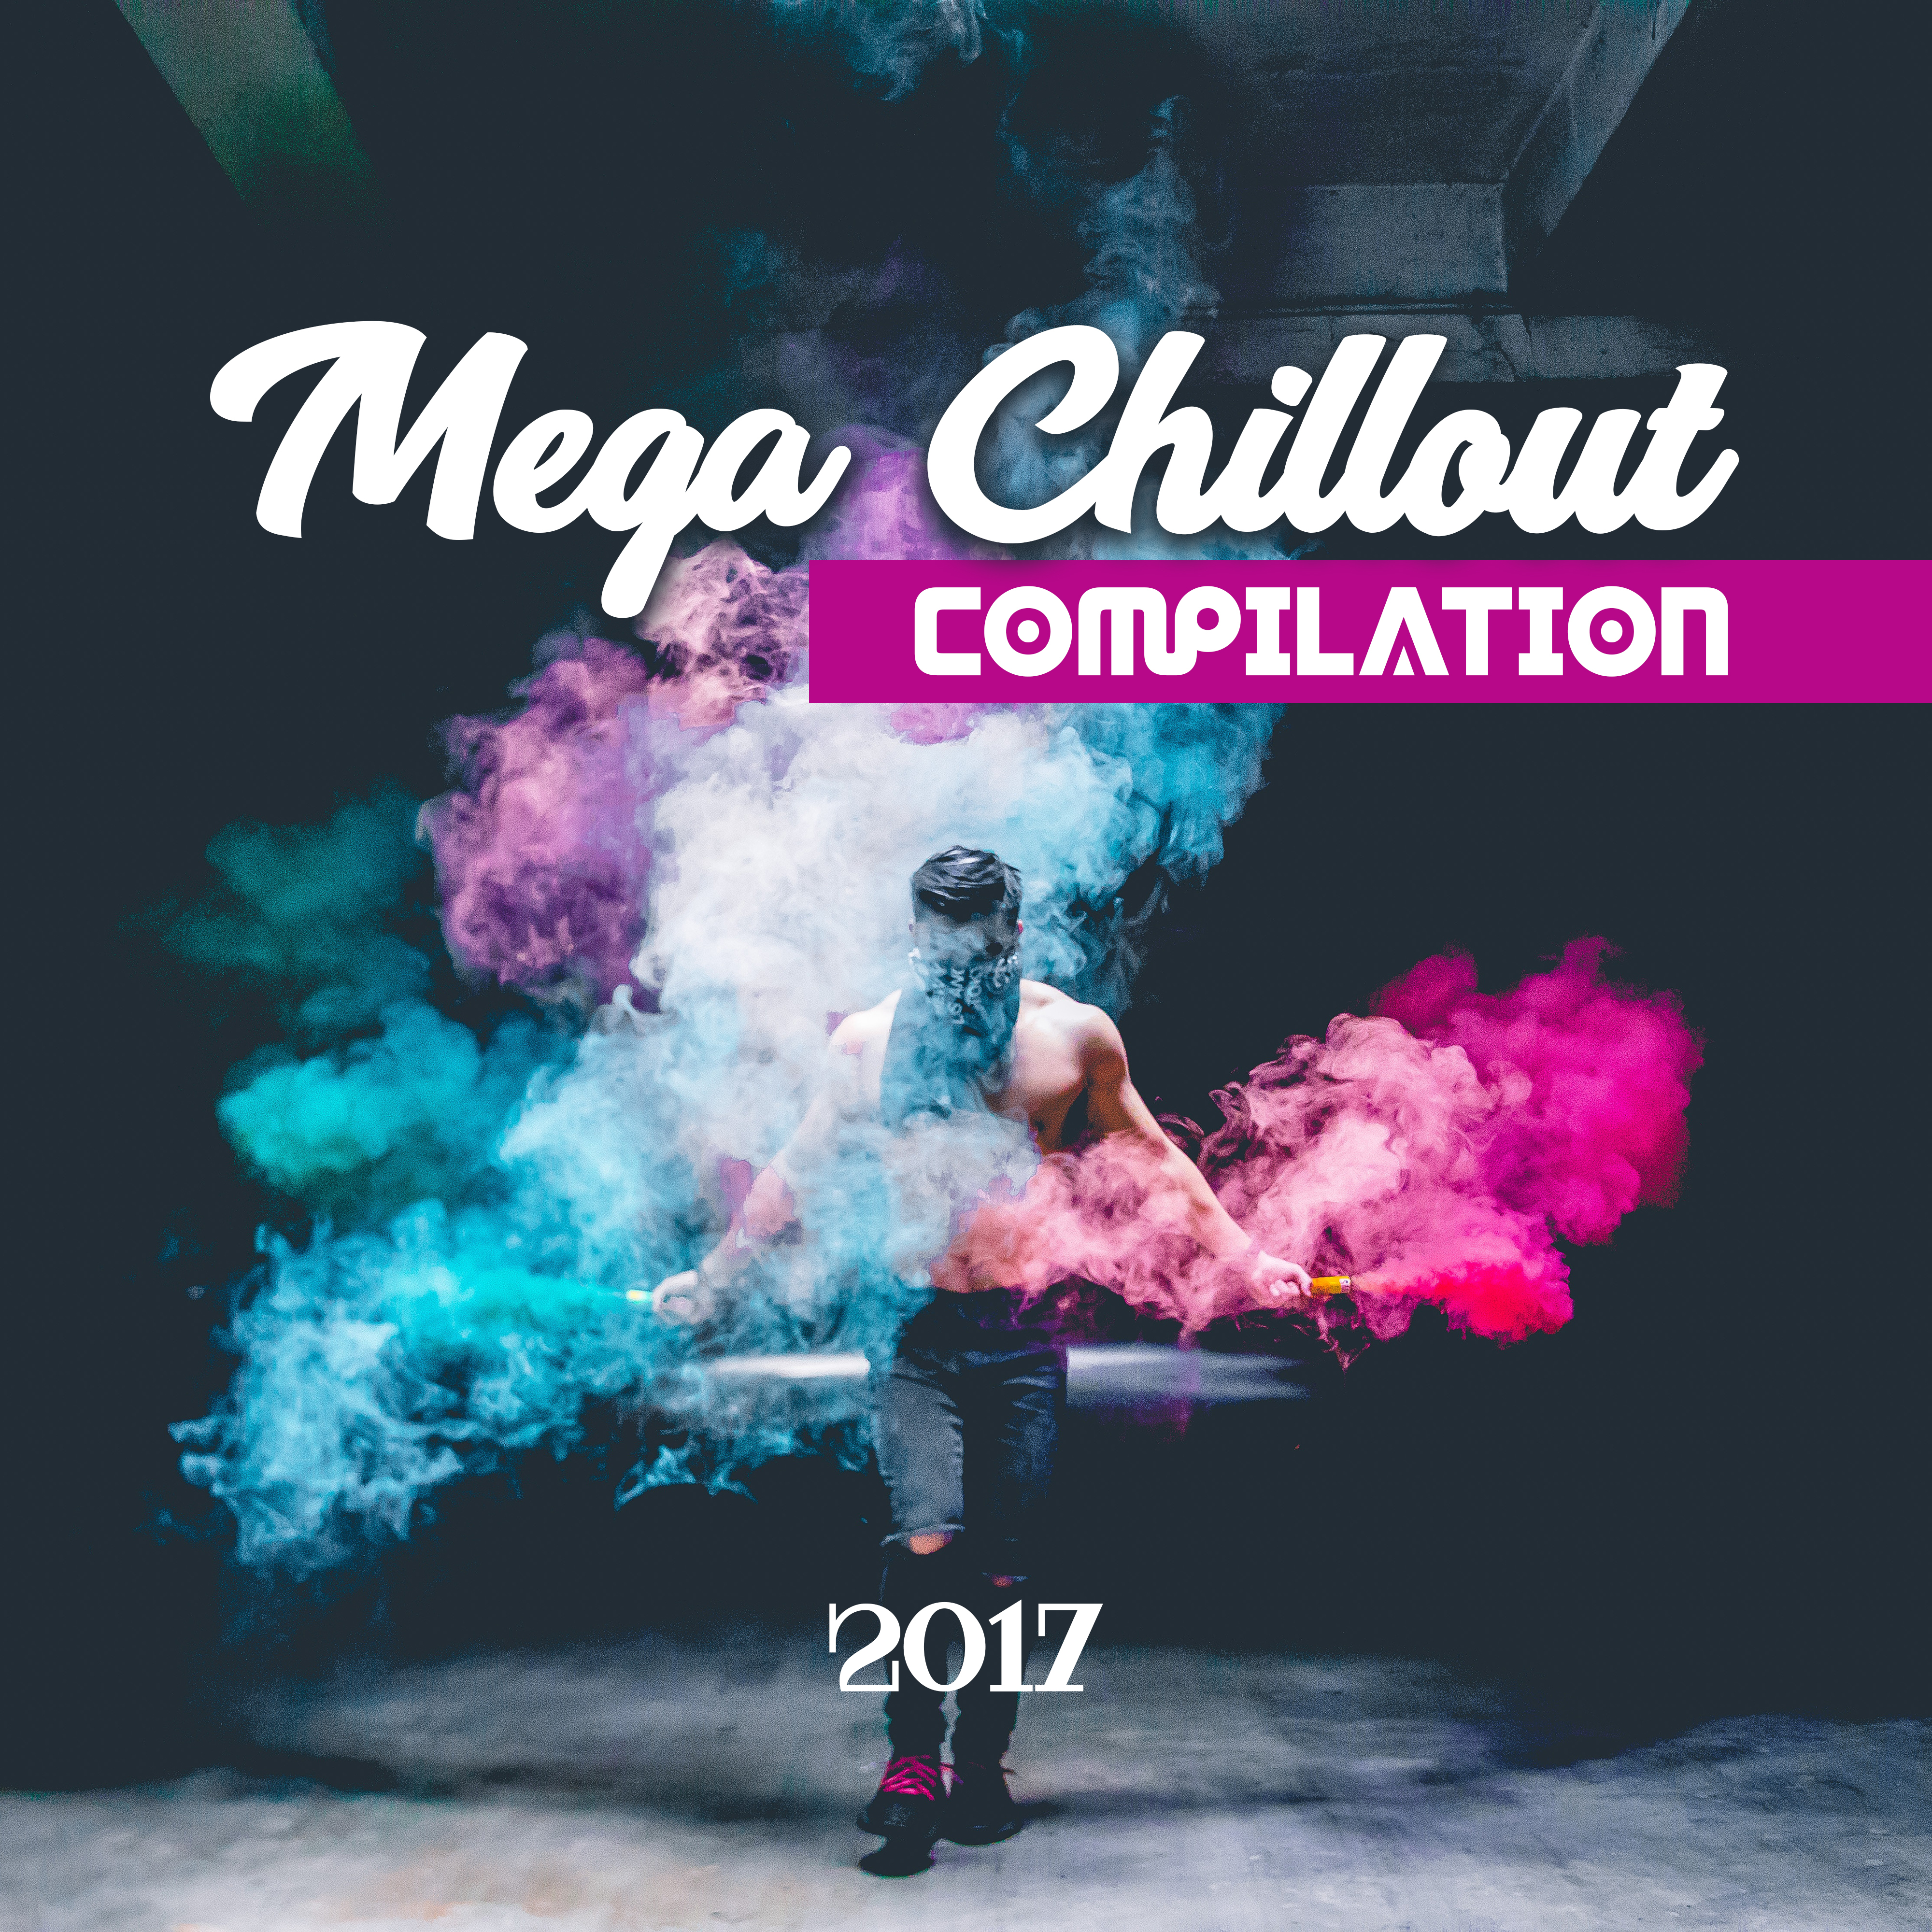 Mega Chillout Compilation 2017  New Chill Out Music, Chillout Hard, Summer Vibes, Party Music, Lounge